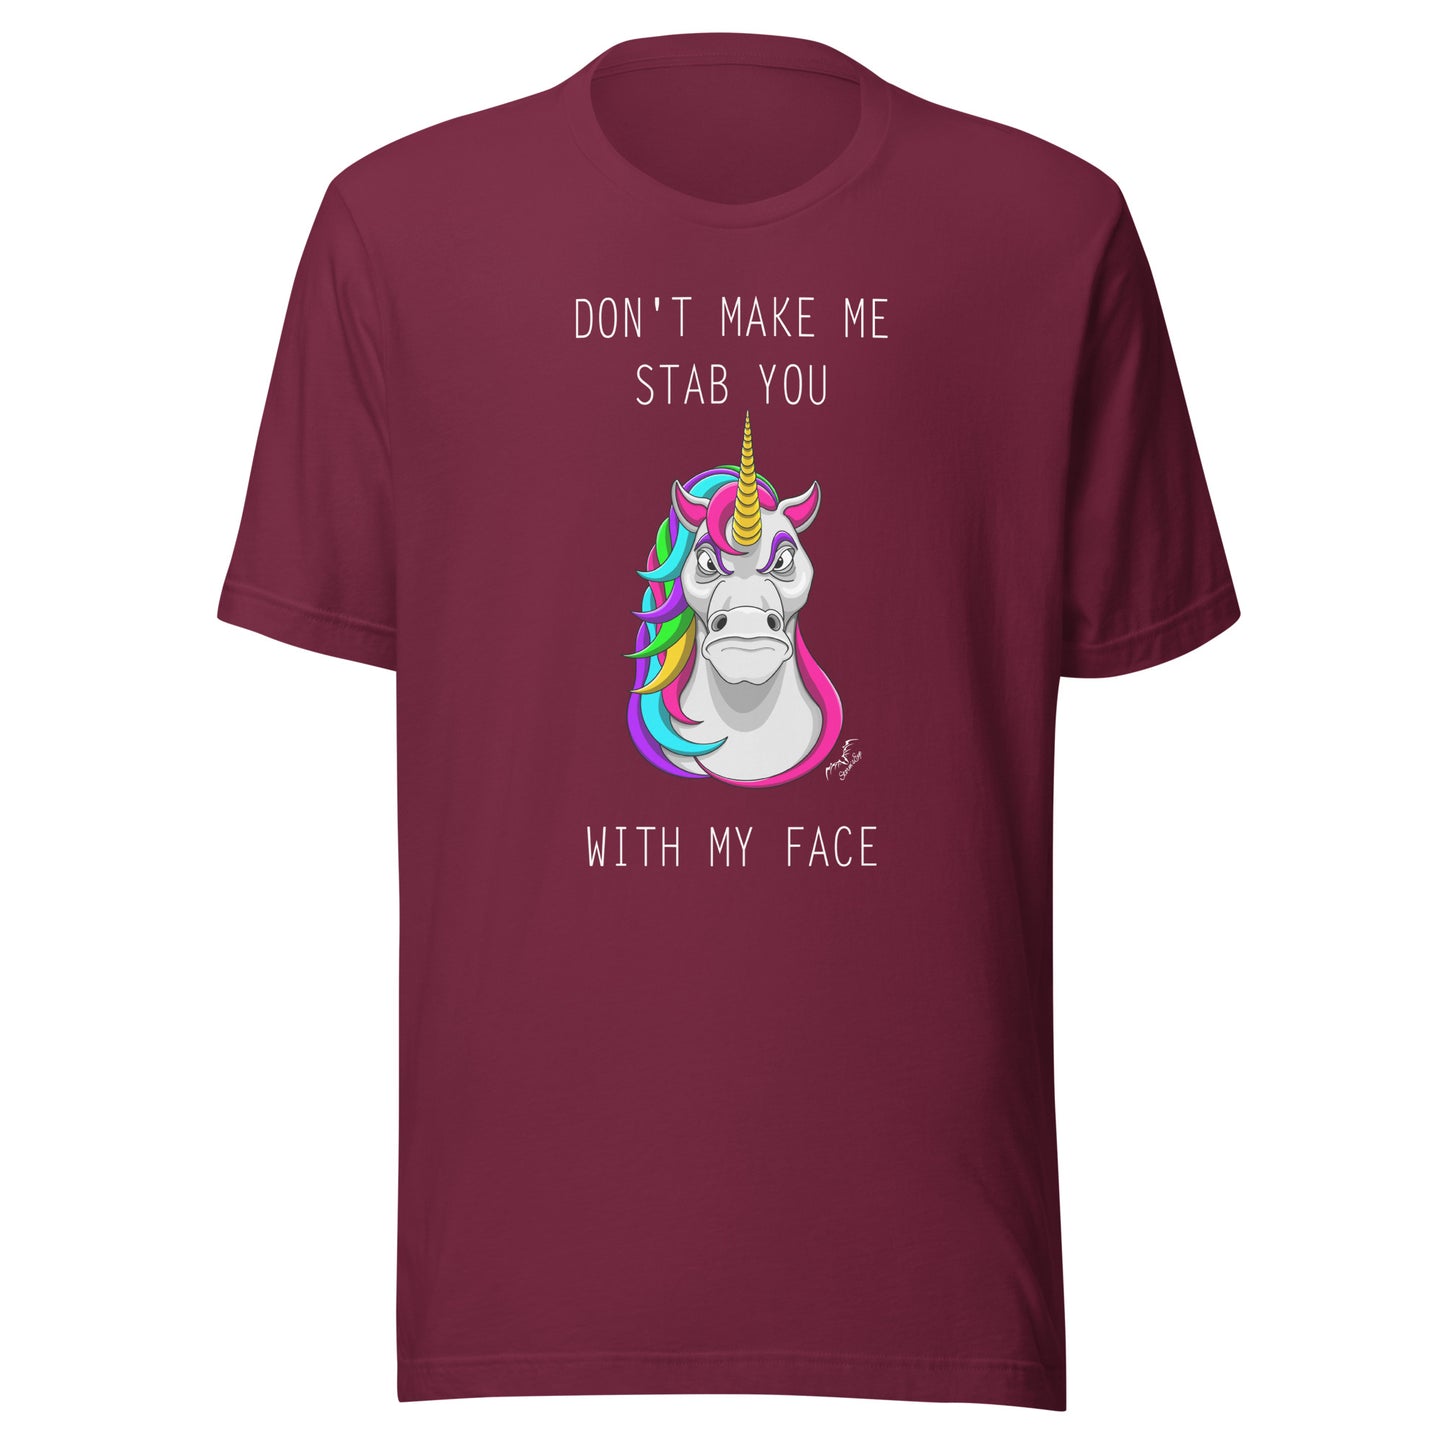 Funny Stabby Unicorn t-shirt wine red, by Stormseye Design